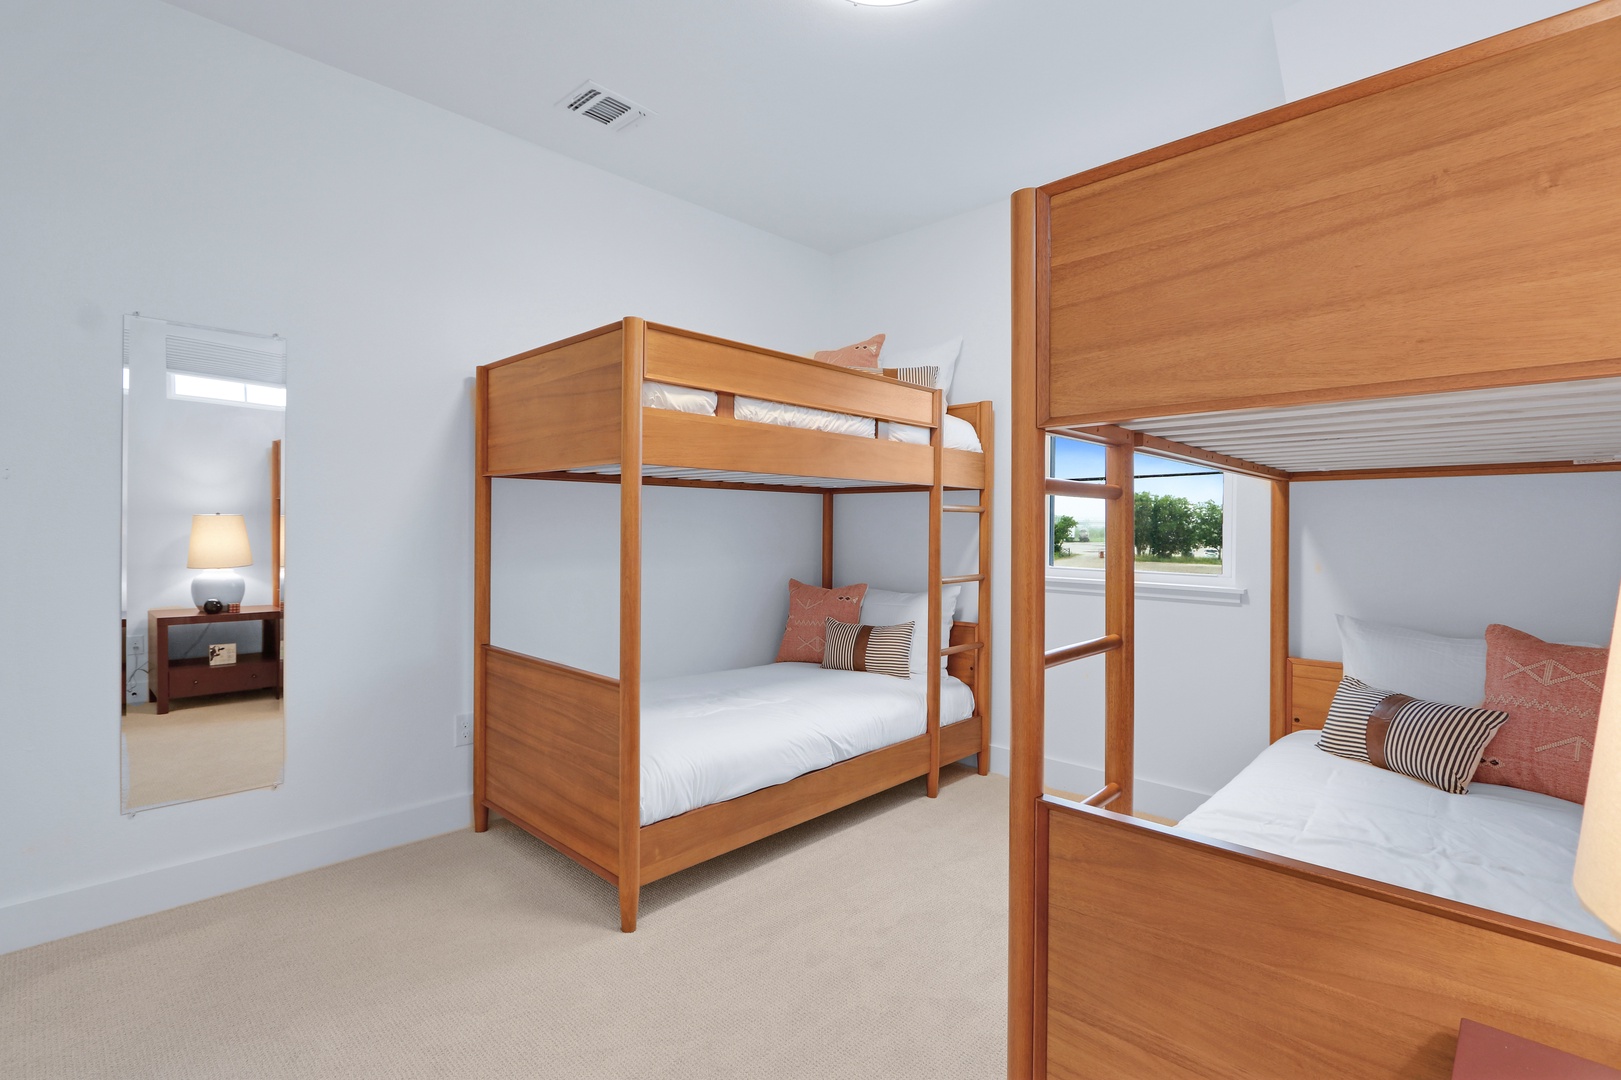 The final bedroom sanctuary includes a pair of twin-over-twin bunk beds